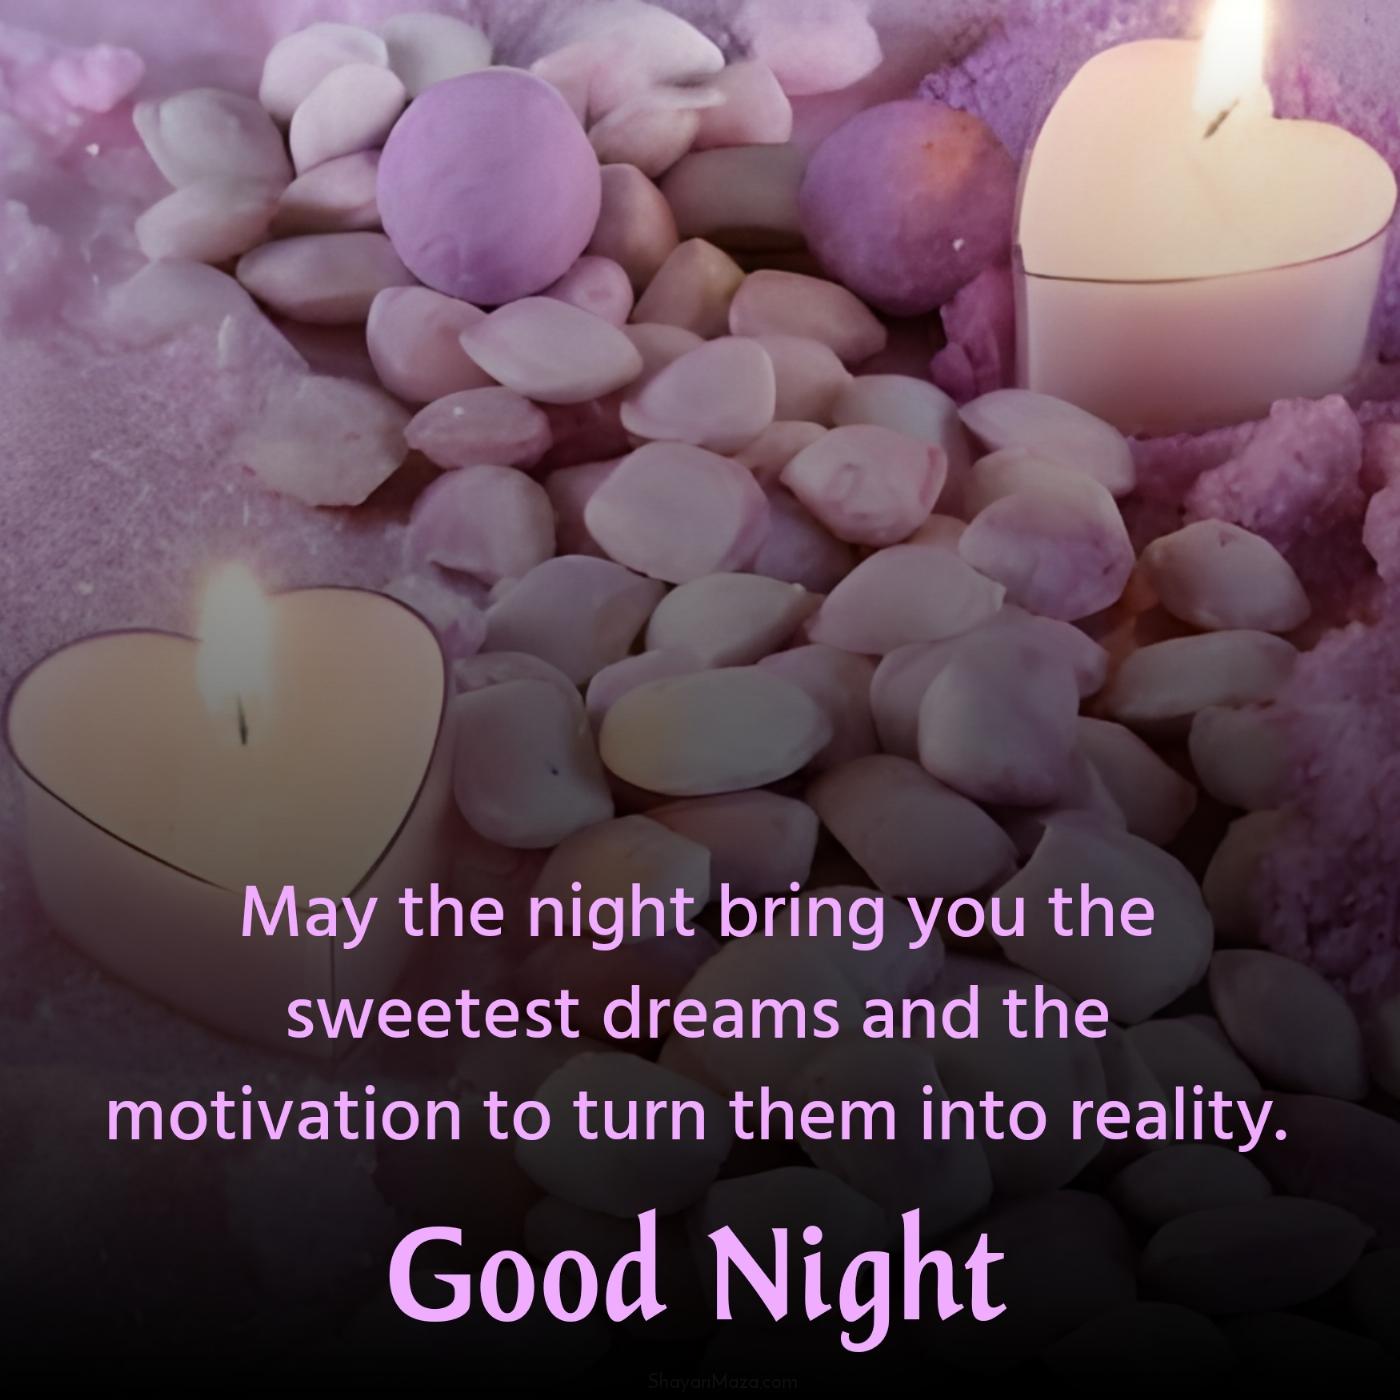 May the night bring you the sweetest dreams and the motivation